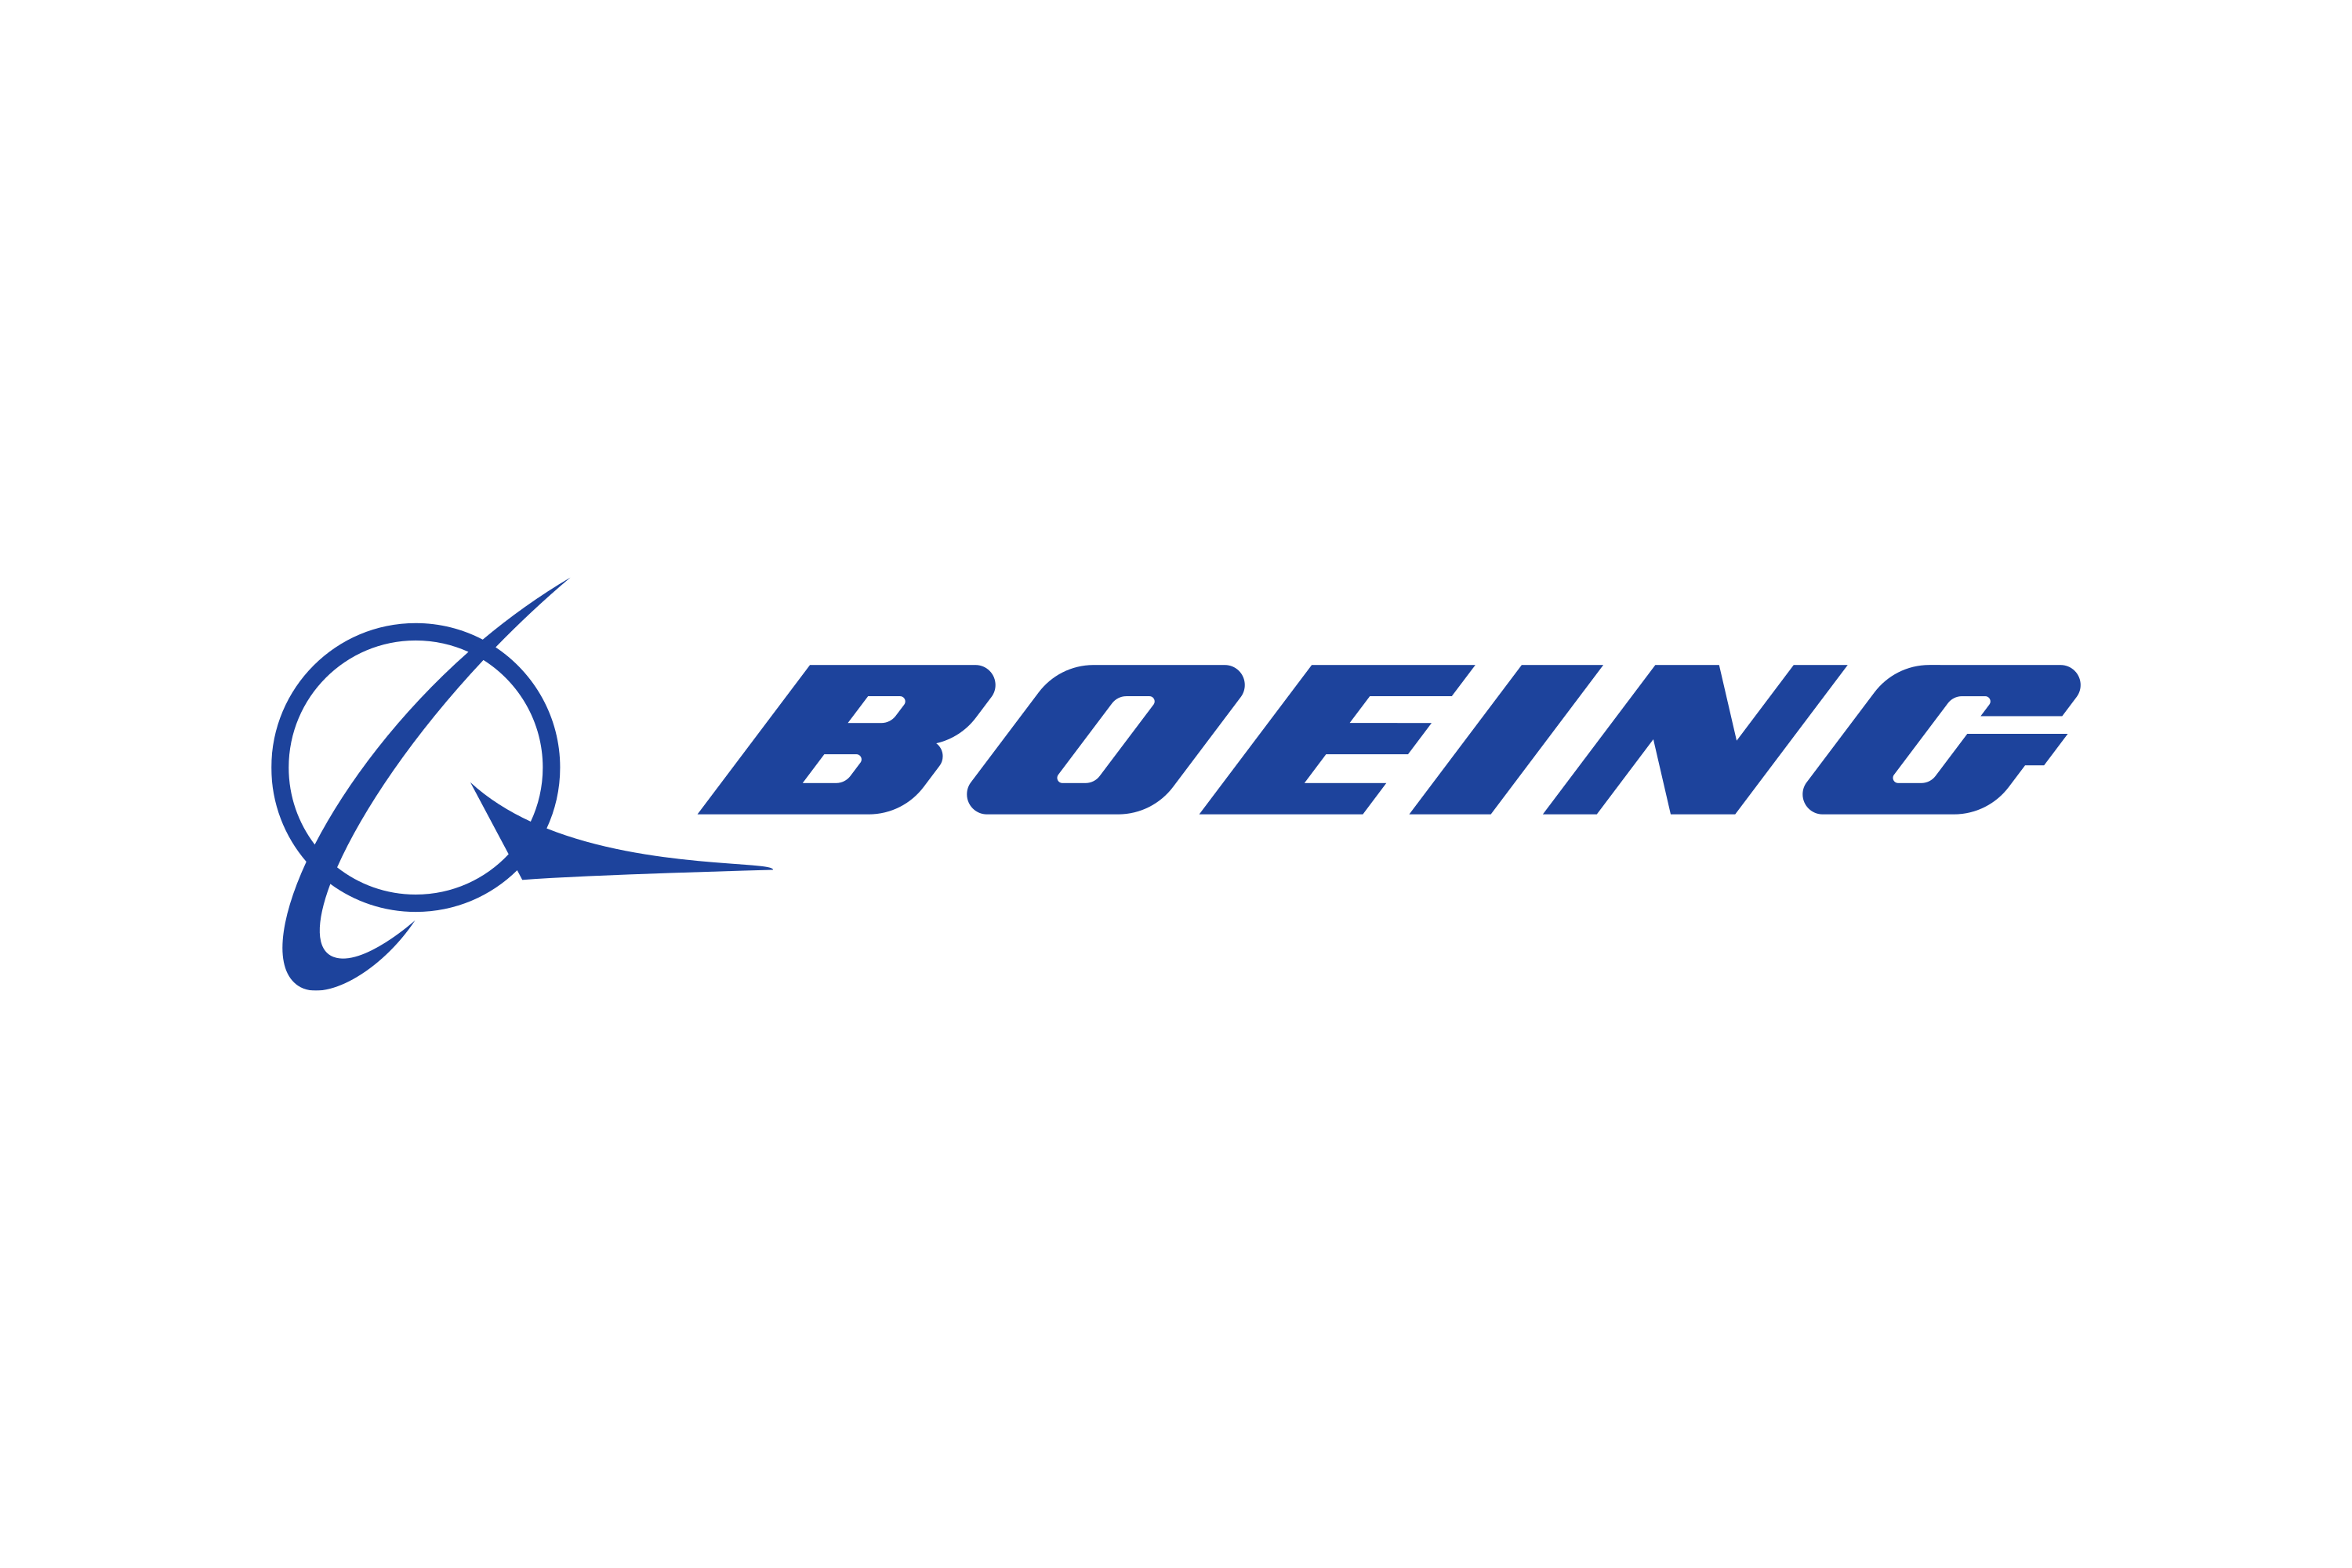 Boeing Commercial Airplanes